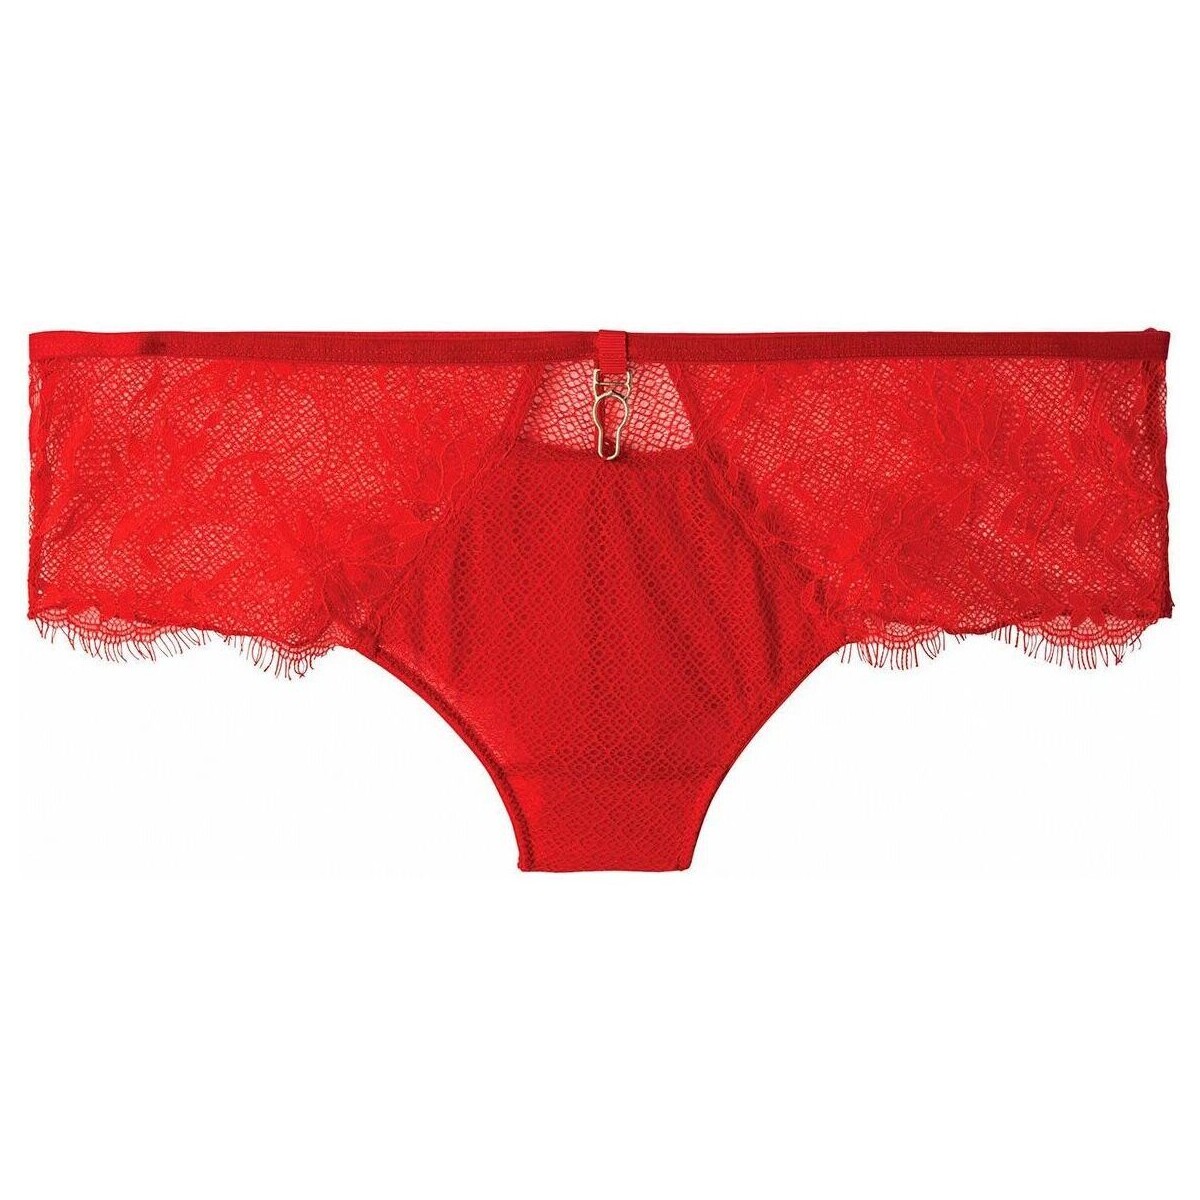 Pomm´poire Rouge Shorty tanga rouge Sangria W6kmR8